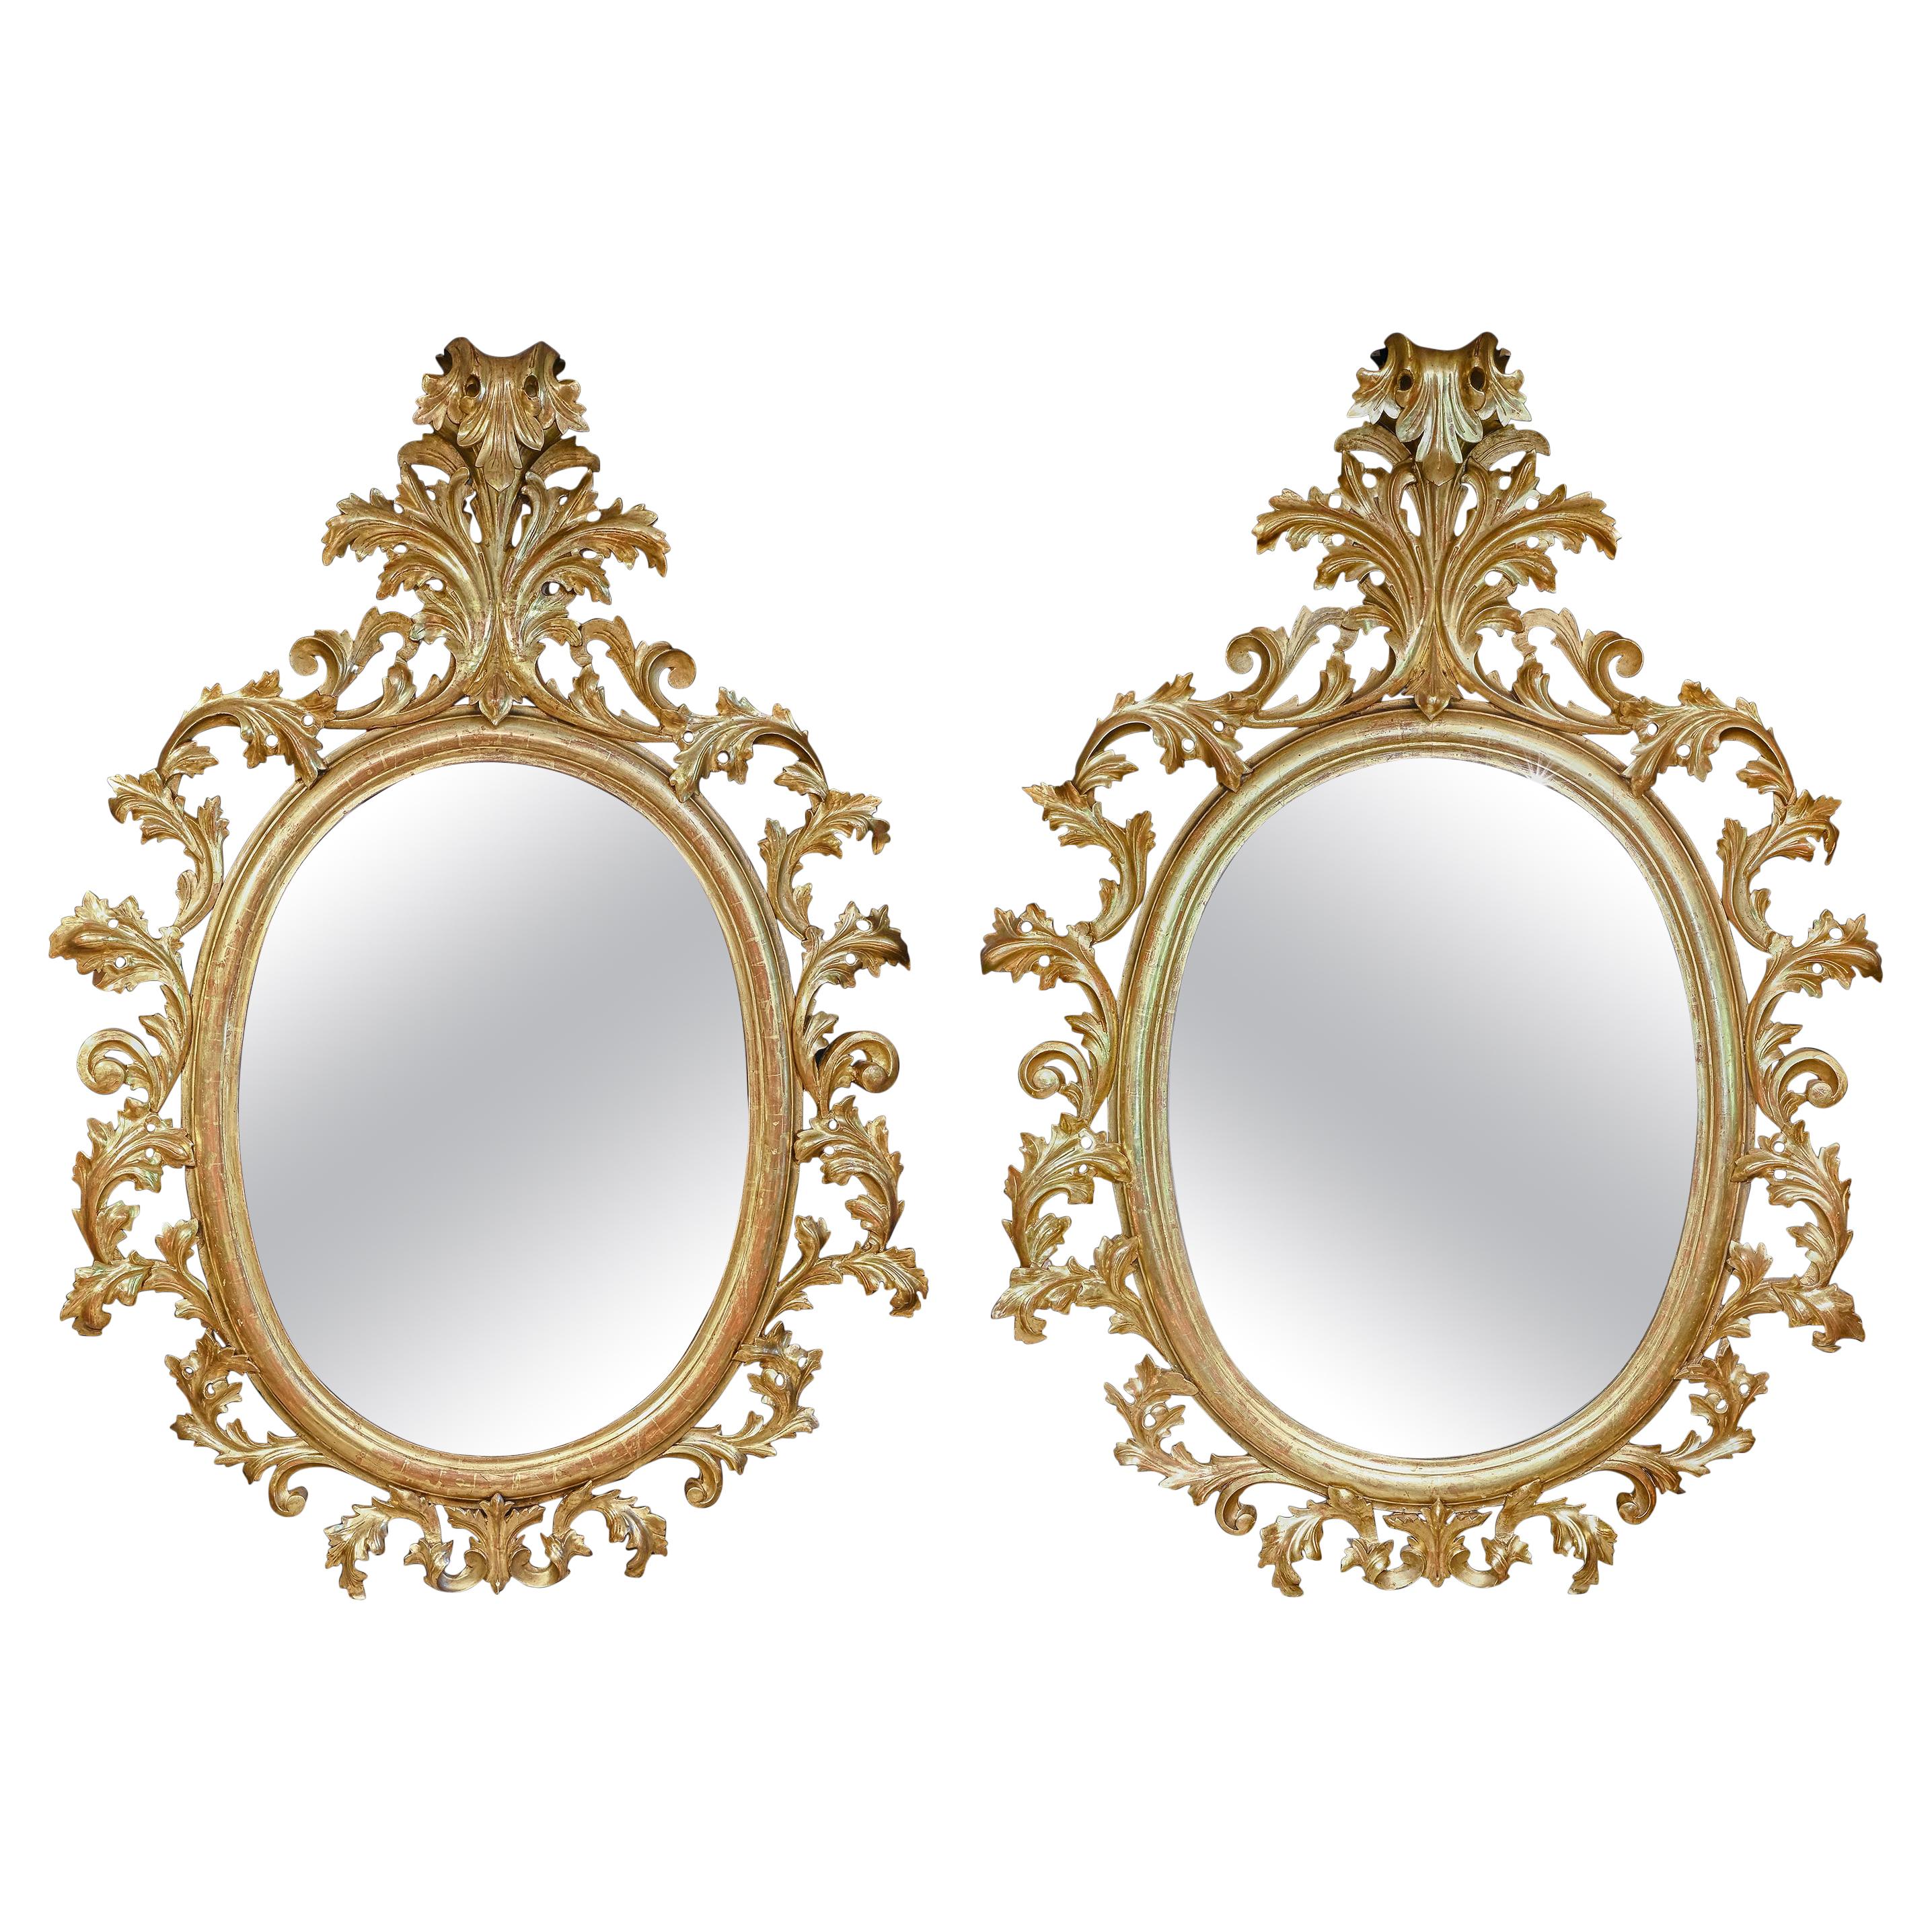 Monumental Pair of 19th Century Oval Florentine Carved Giltwood Mirrors